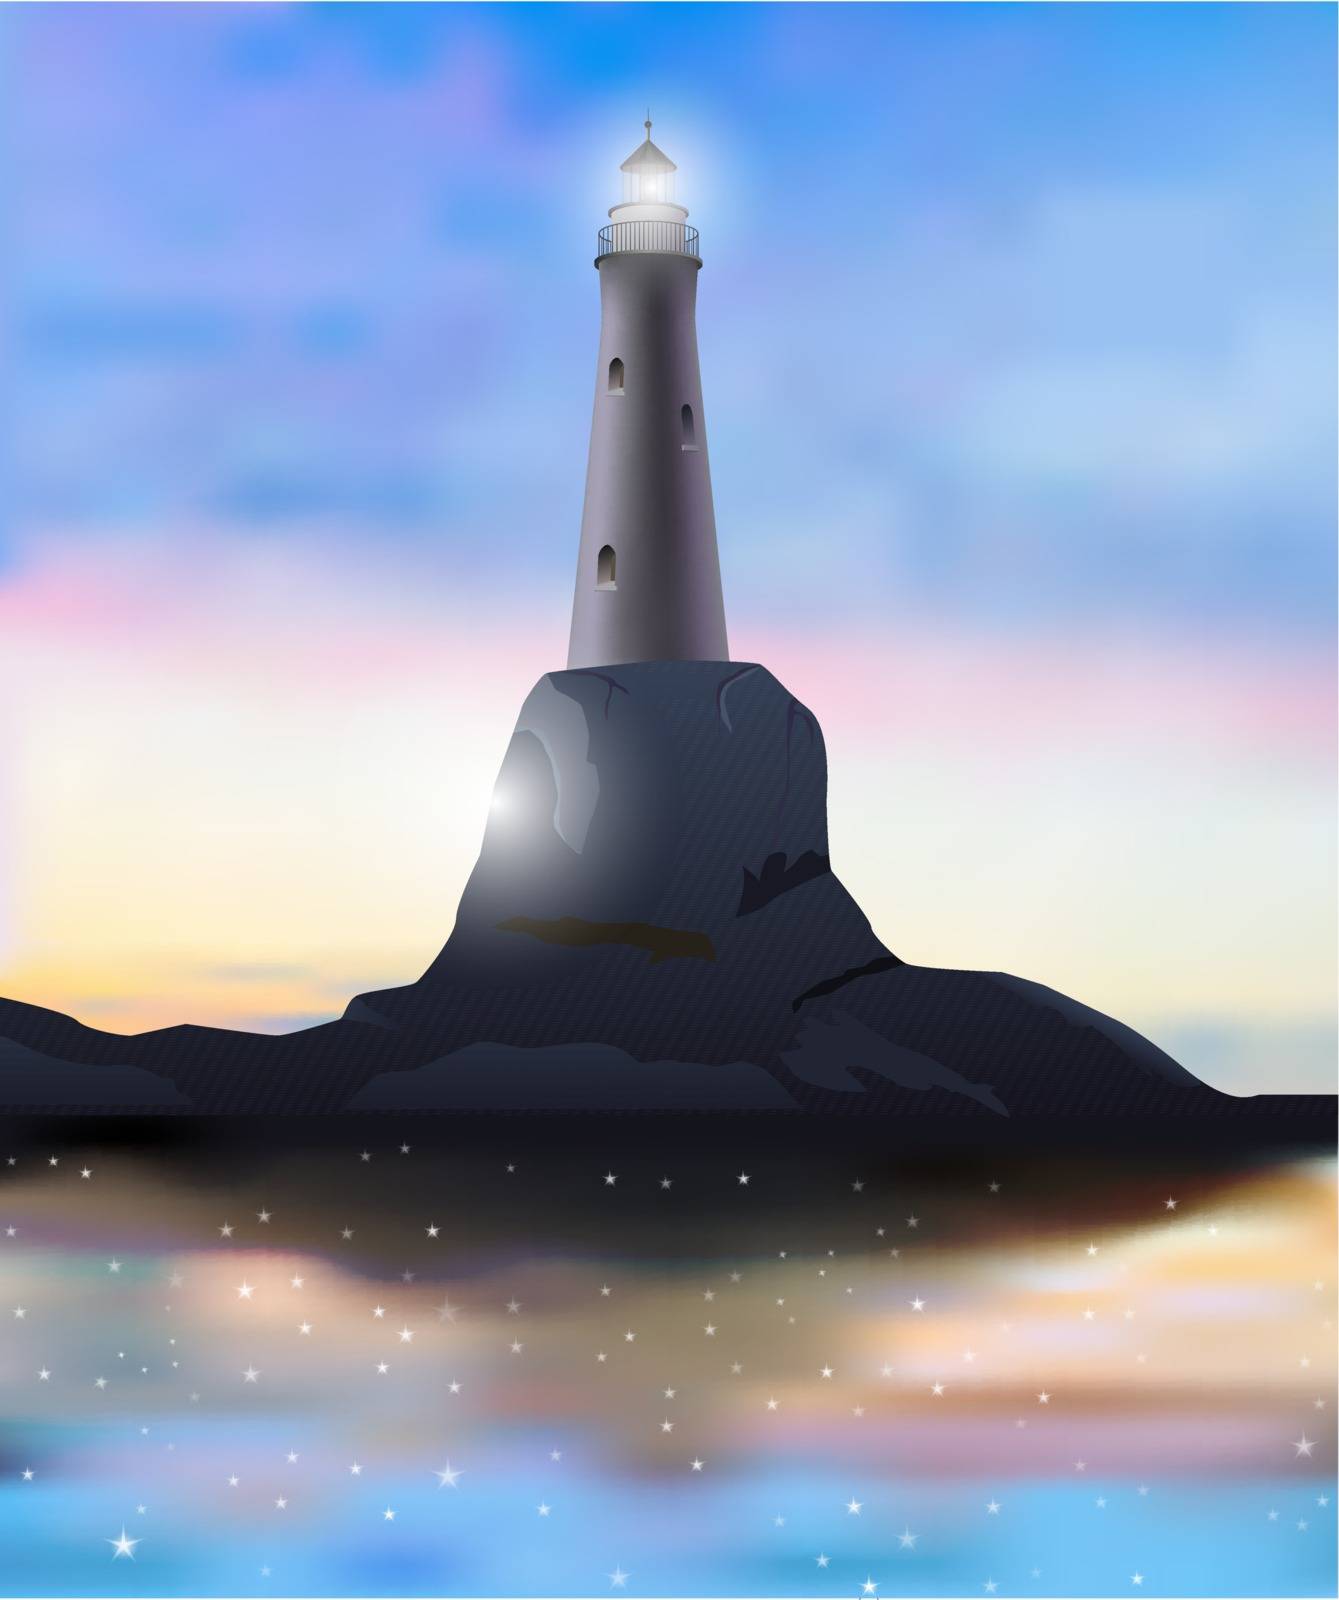 Vector Lighthouse on Rocky Island in The Dusk, Eps 10 Vector, Gradient Mesh and Transparency Used